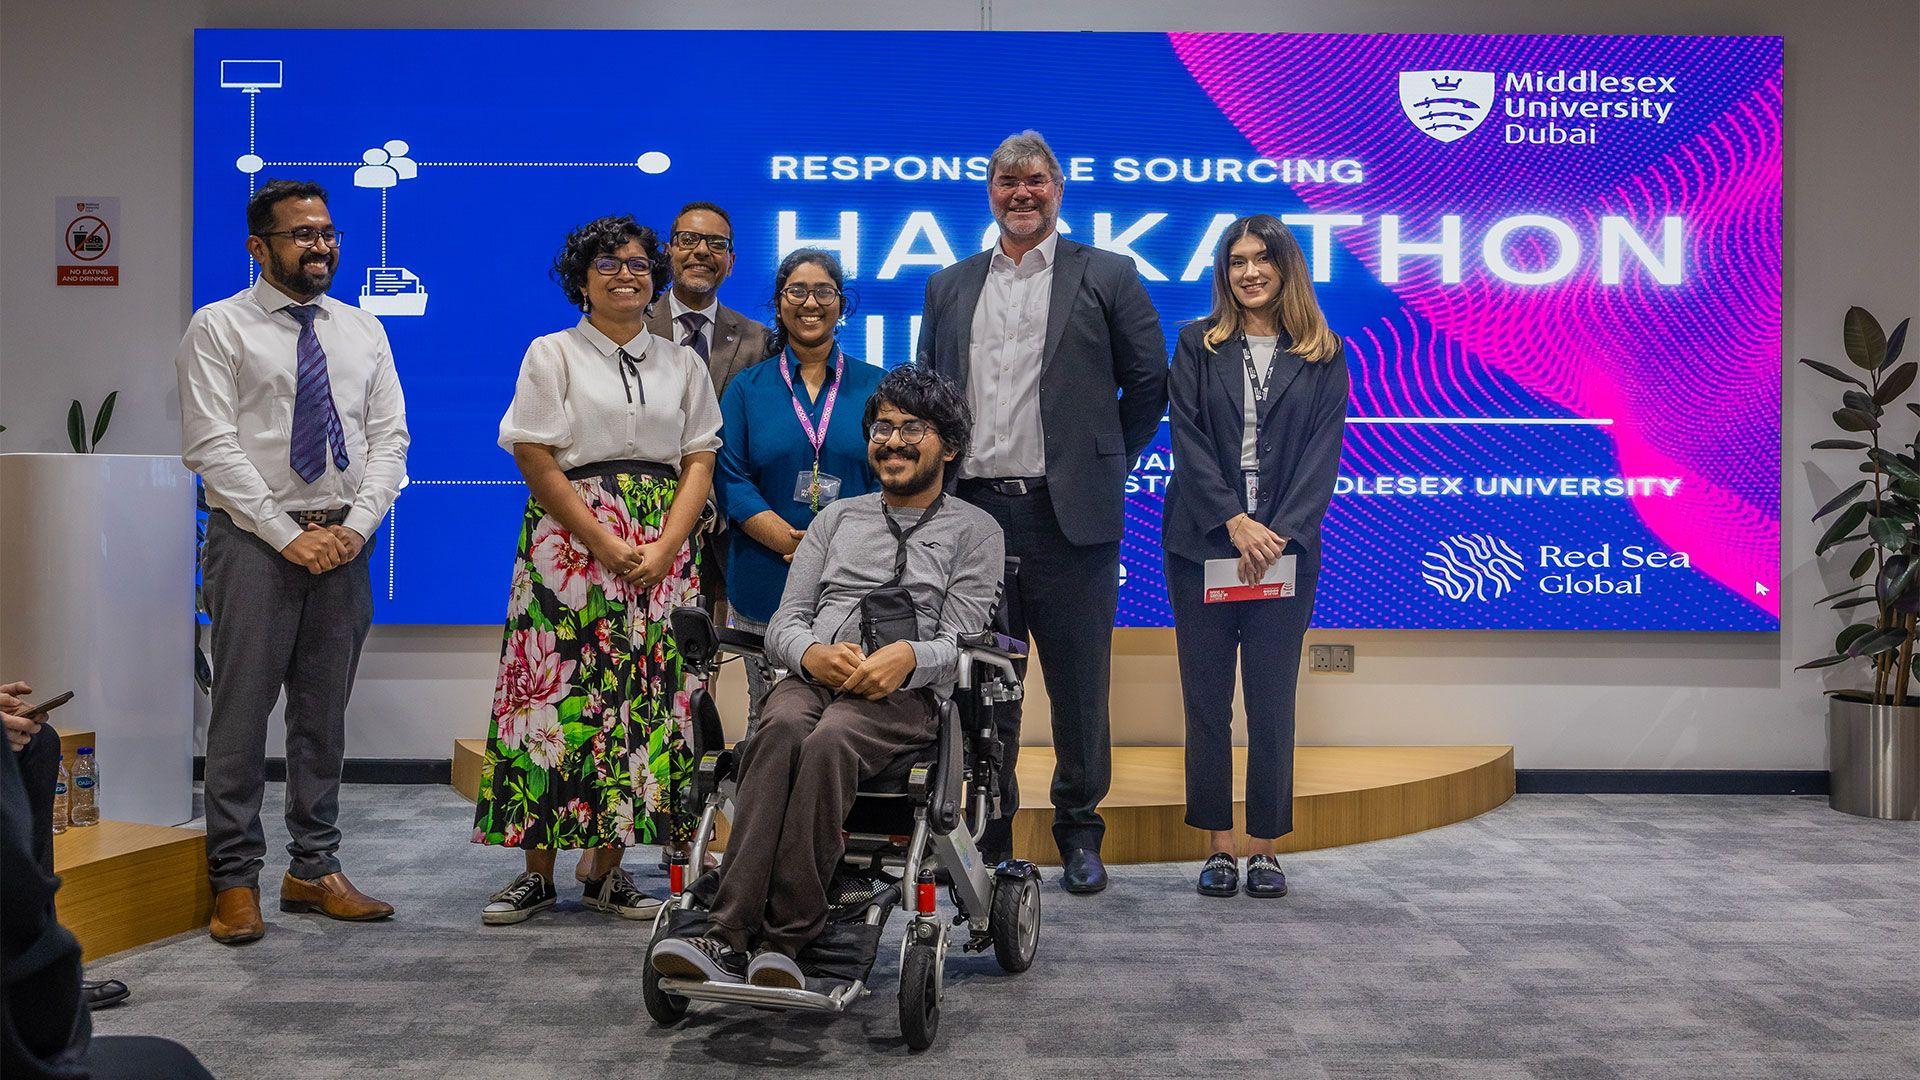 Middlesex University Dubai, in partnership with Accenture and Red Sea Global, were proud to host the Responsible Sourcing Hackathon – a high profile competition aimed at driving innovation in responsible purchasing practices.